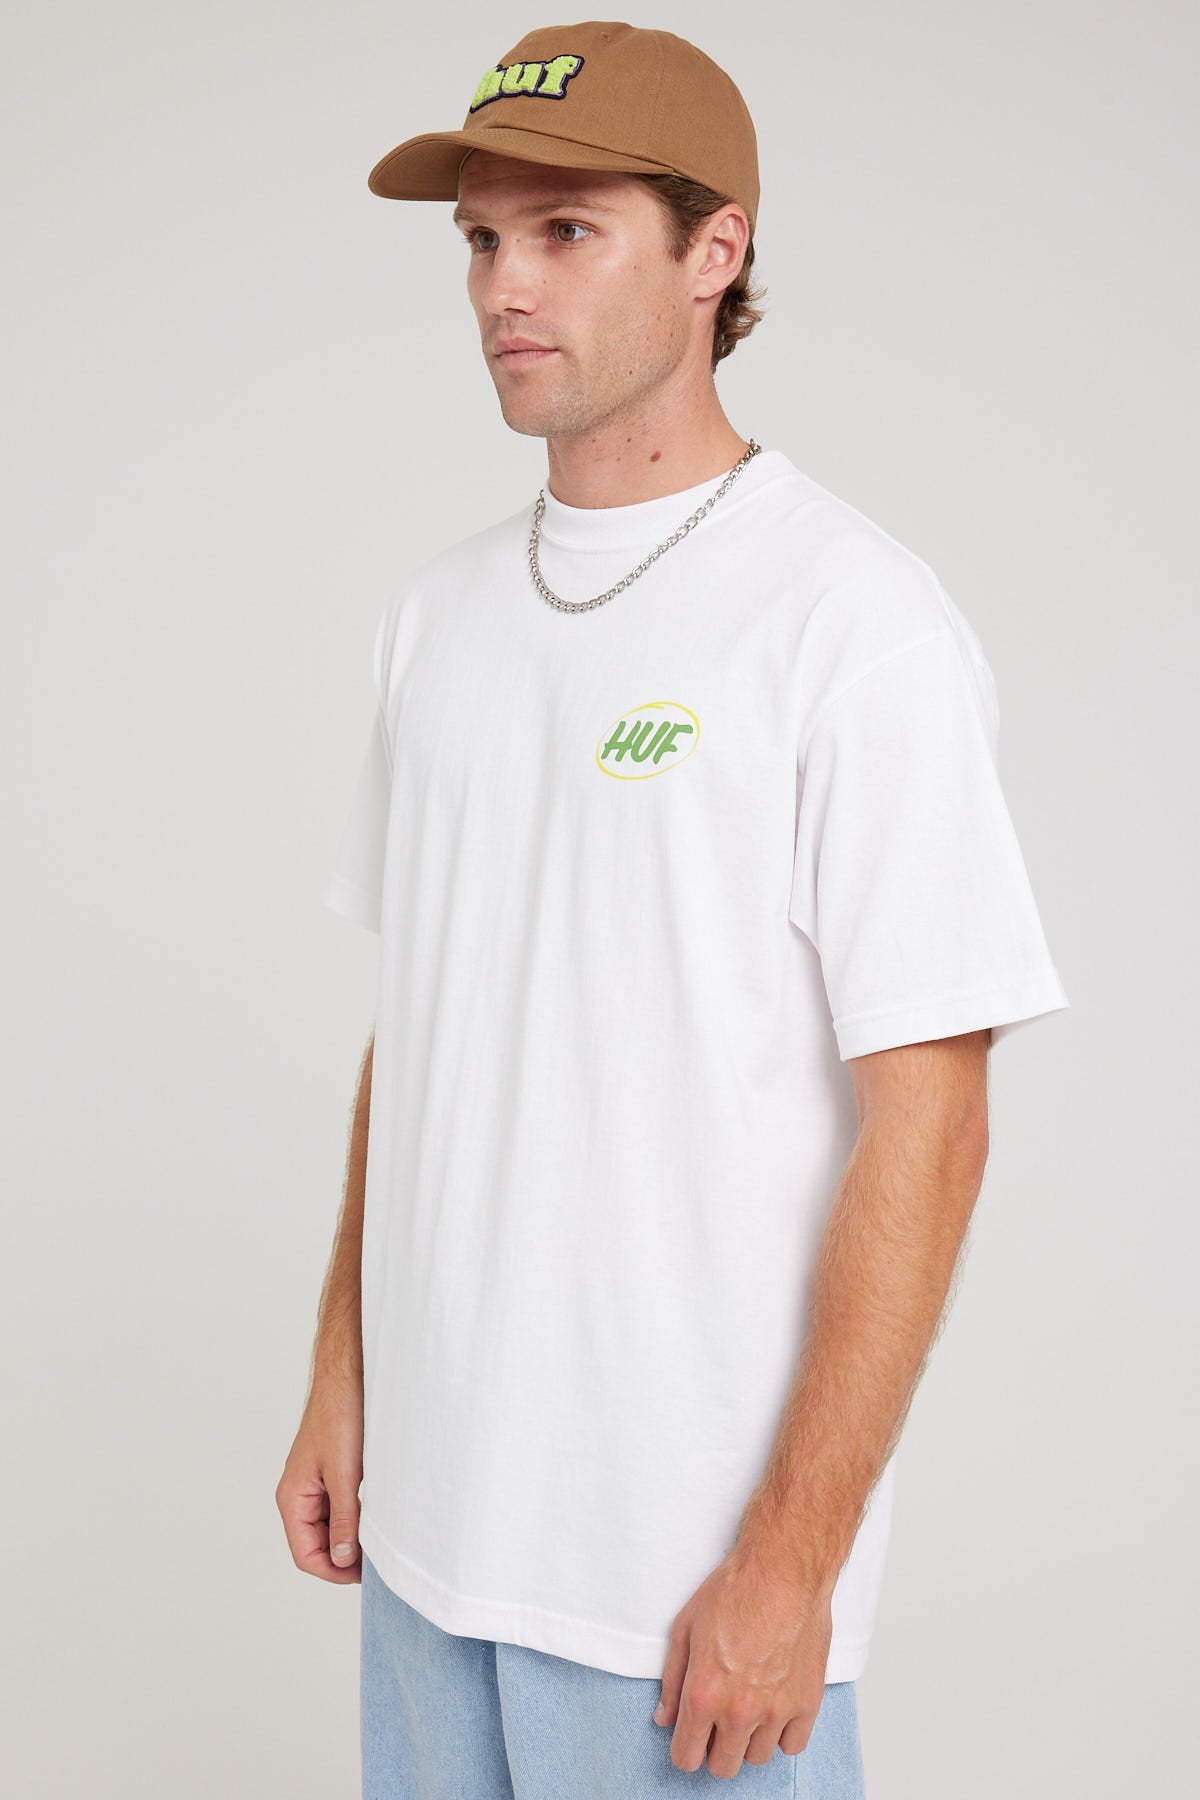 Huf Local Support Tee White